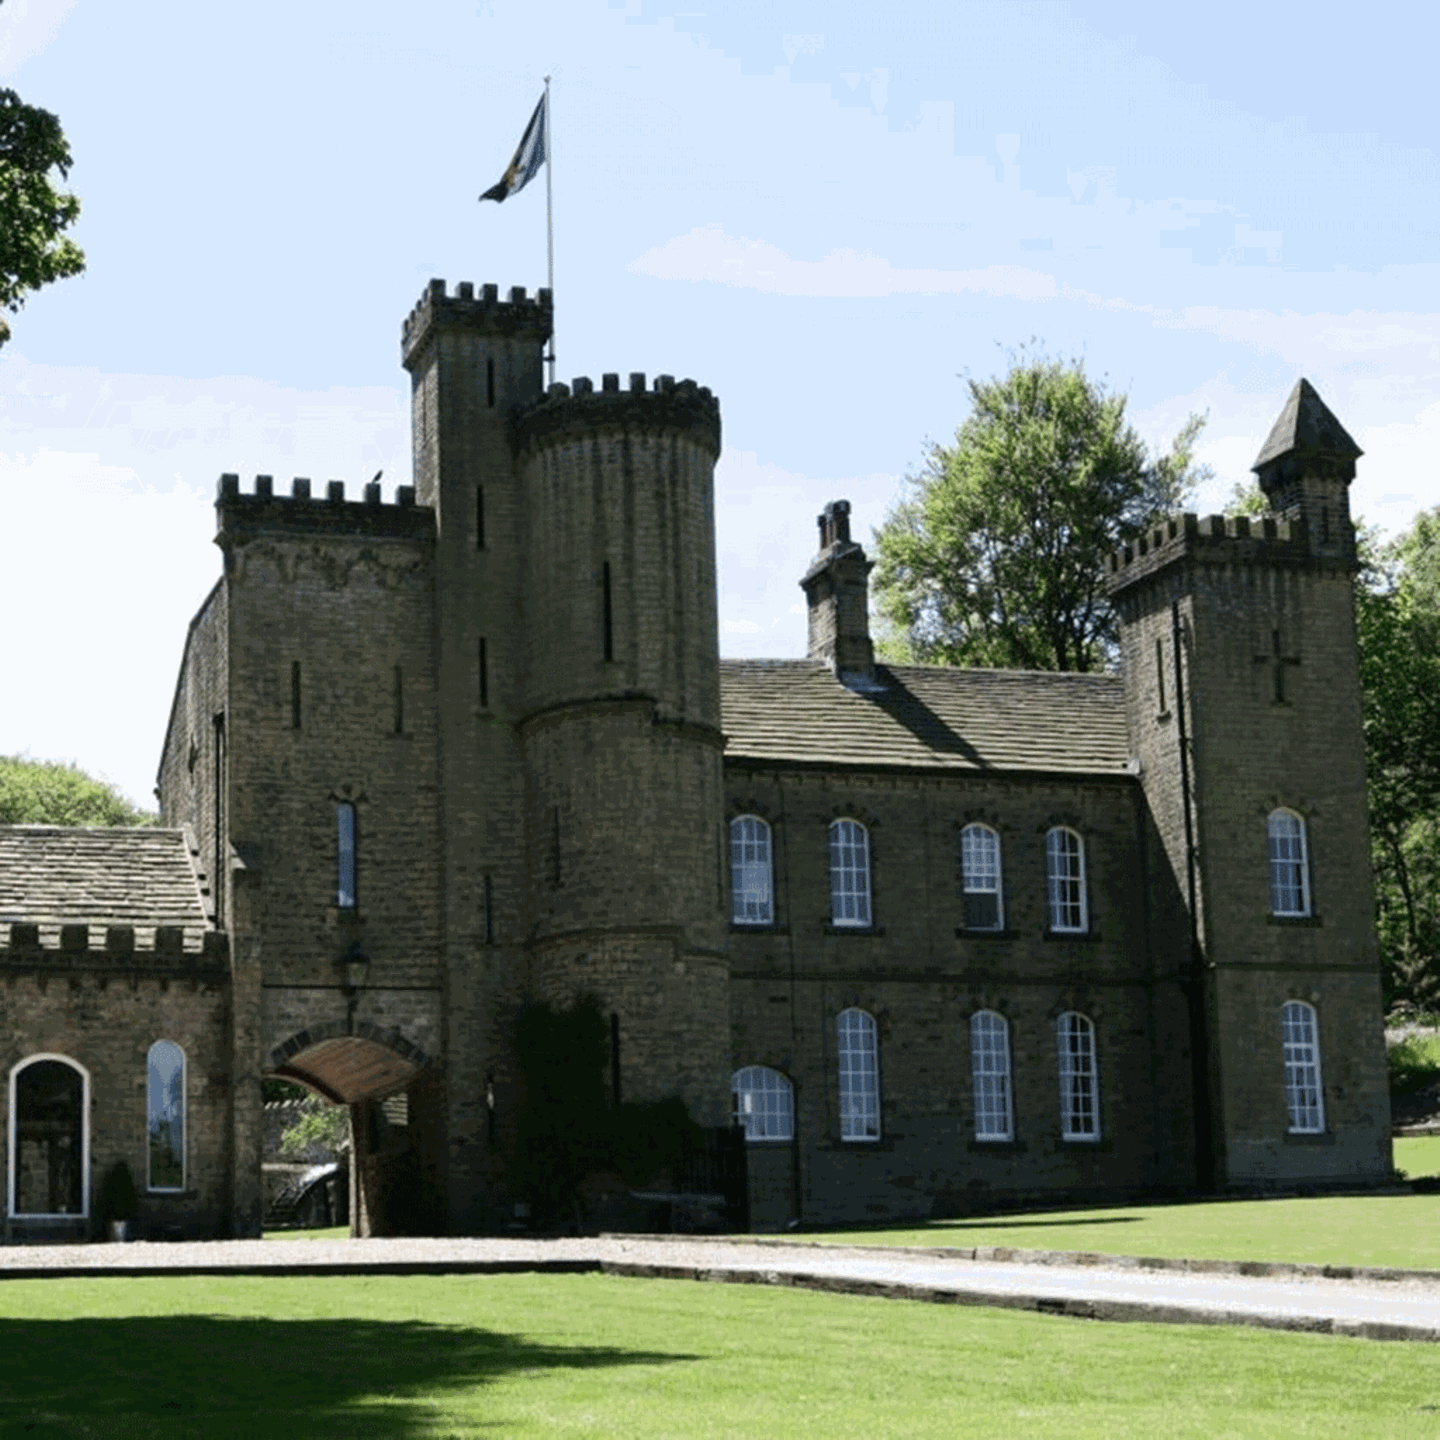 Carr Hall Castle in Yorkshire